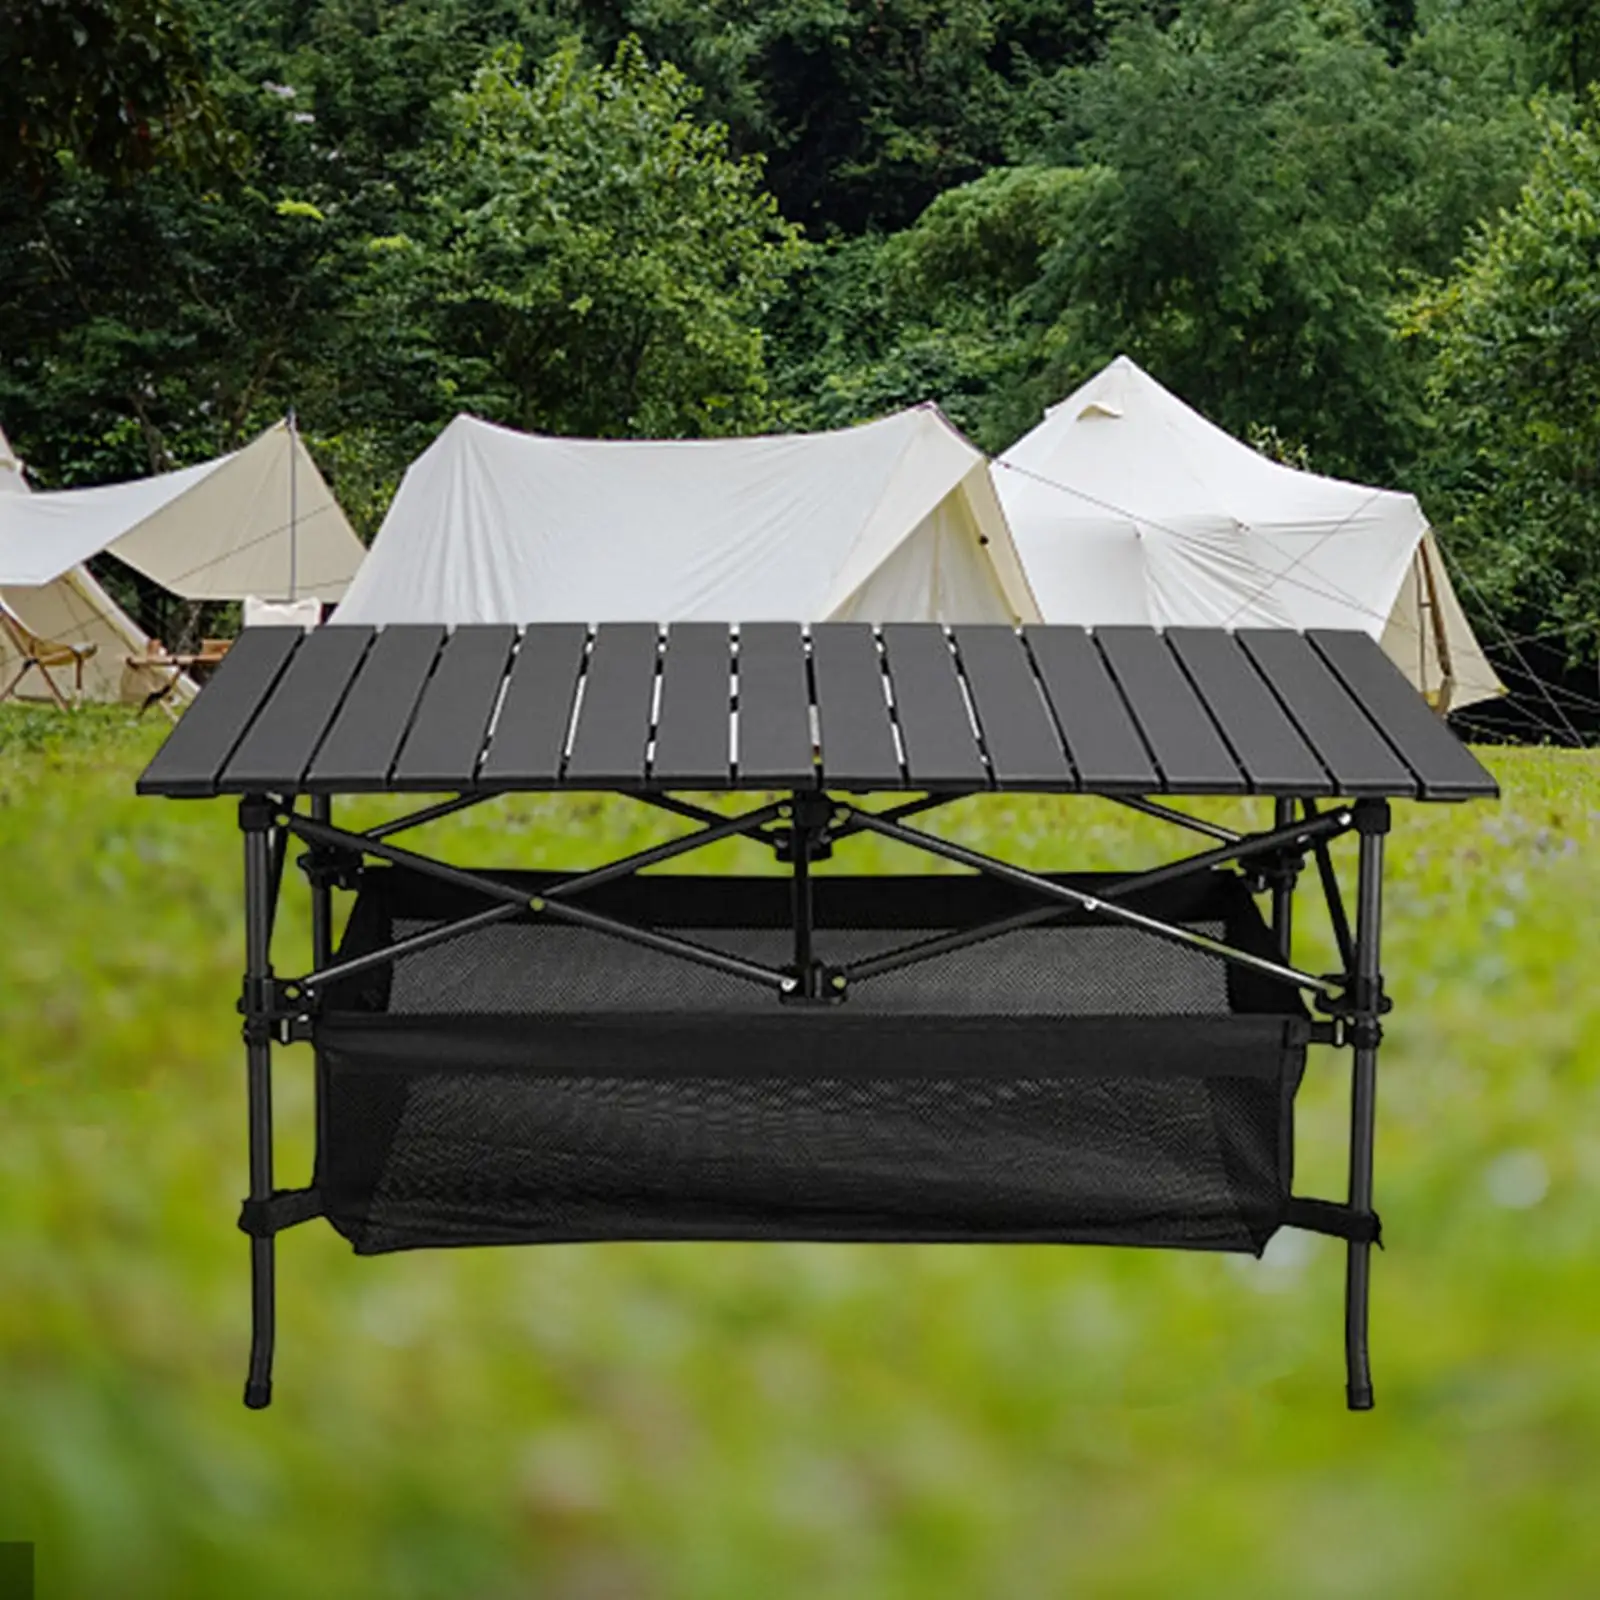 Camping Folding Table Aluminum Table Top with Large Storage Rustless for Fishing Outdoor